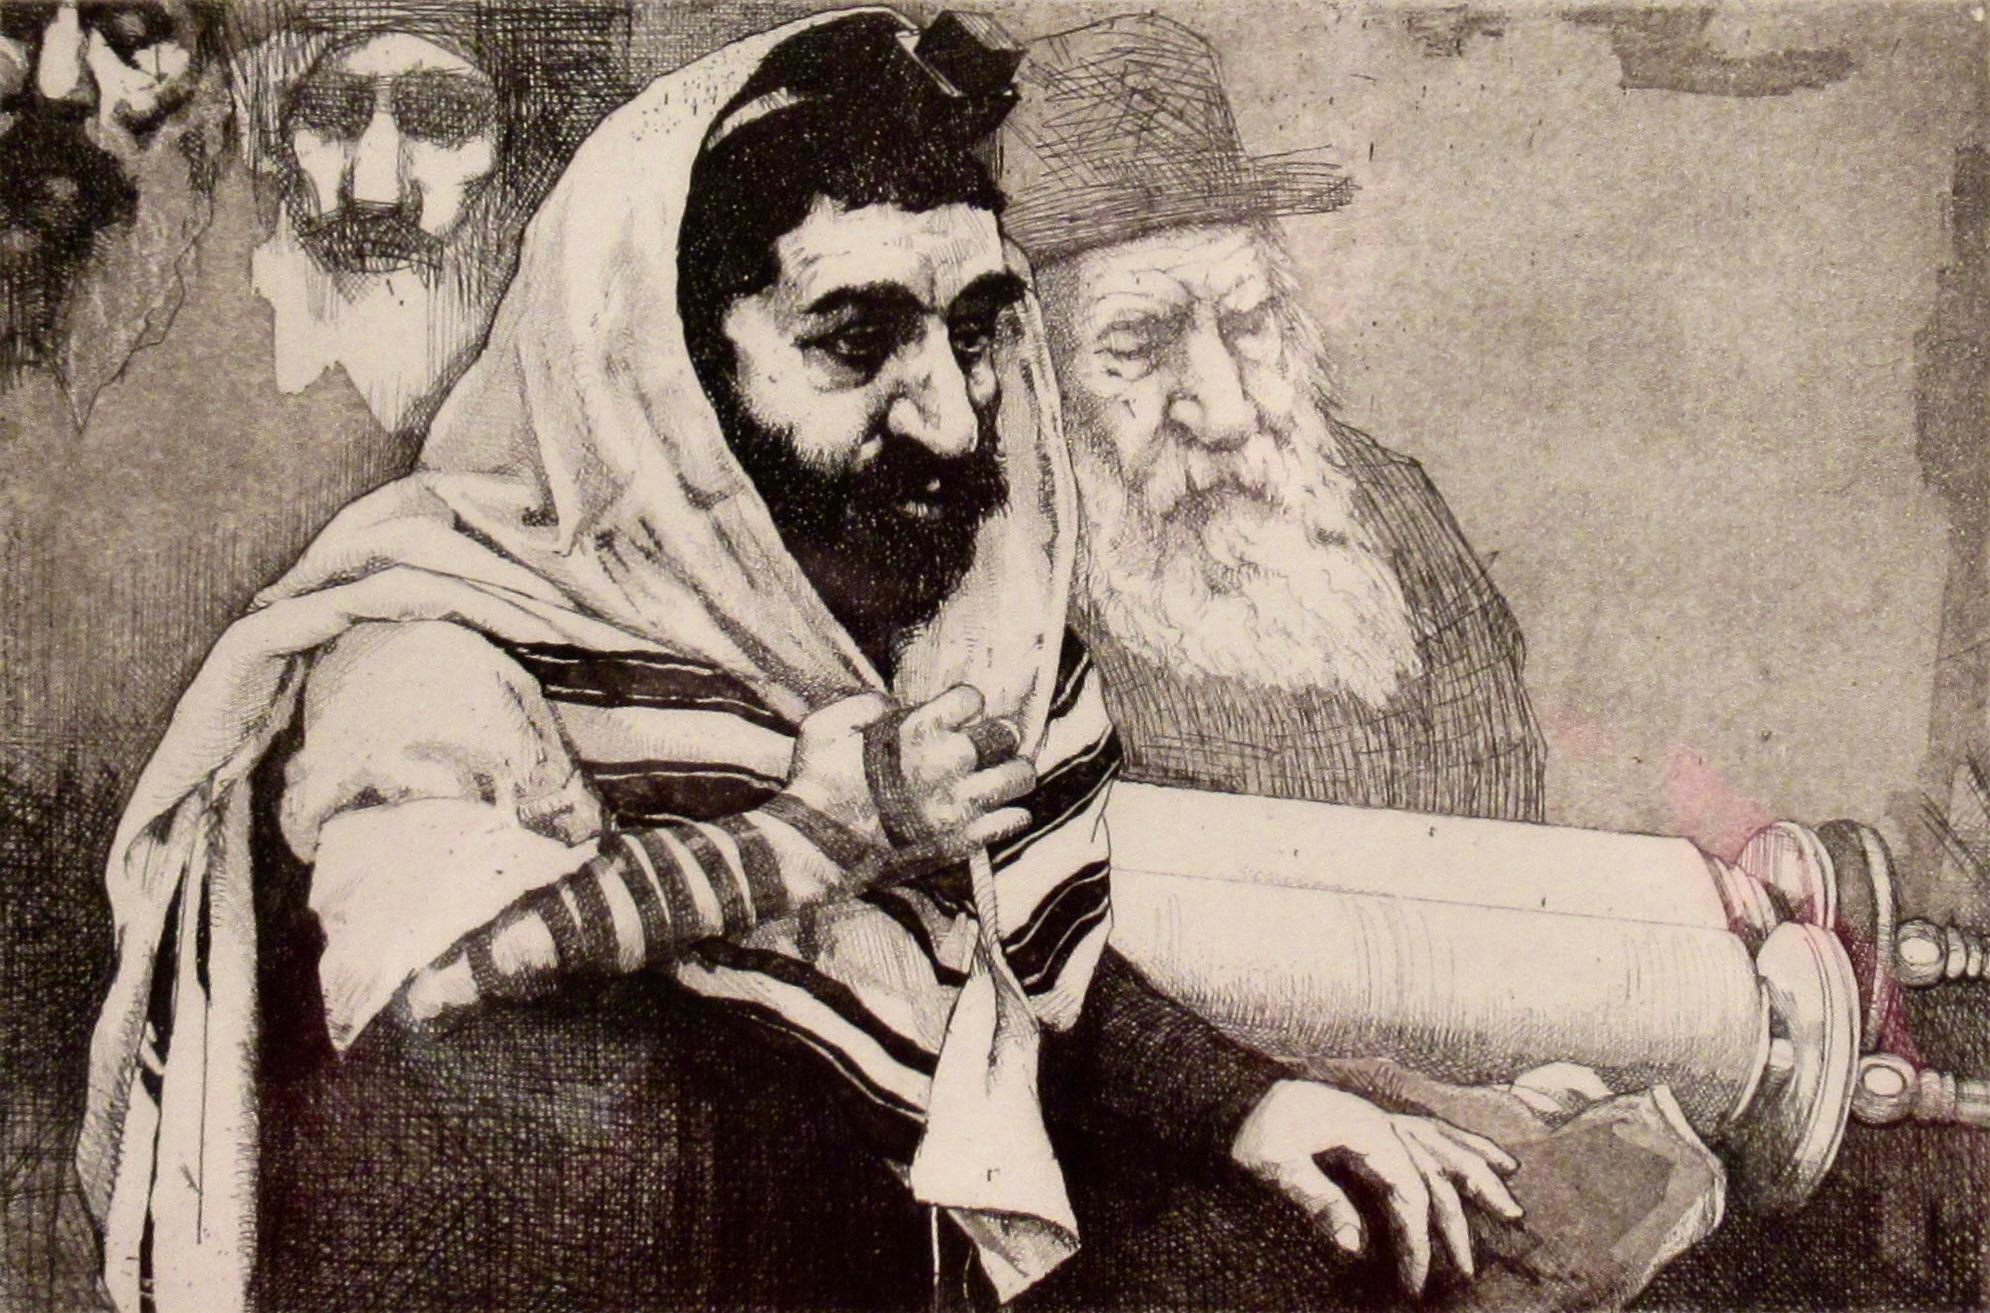 The Reading of the Torah - Other Art Style Print by Charles Bragg